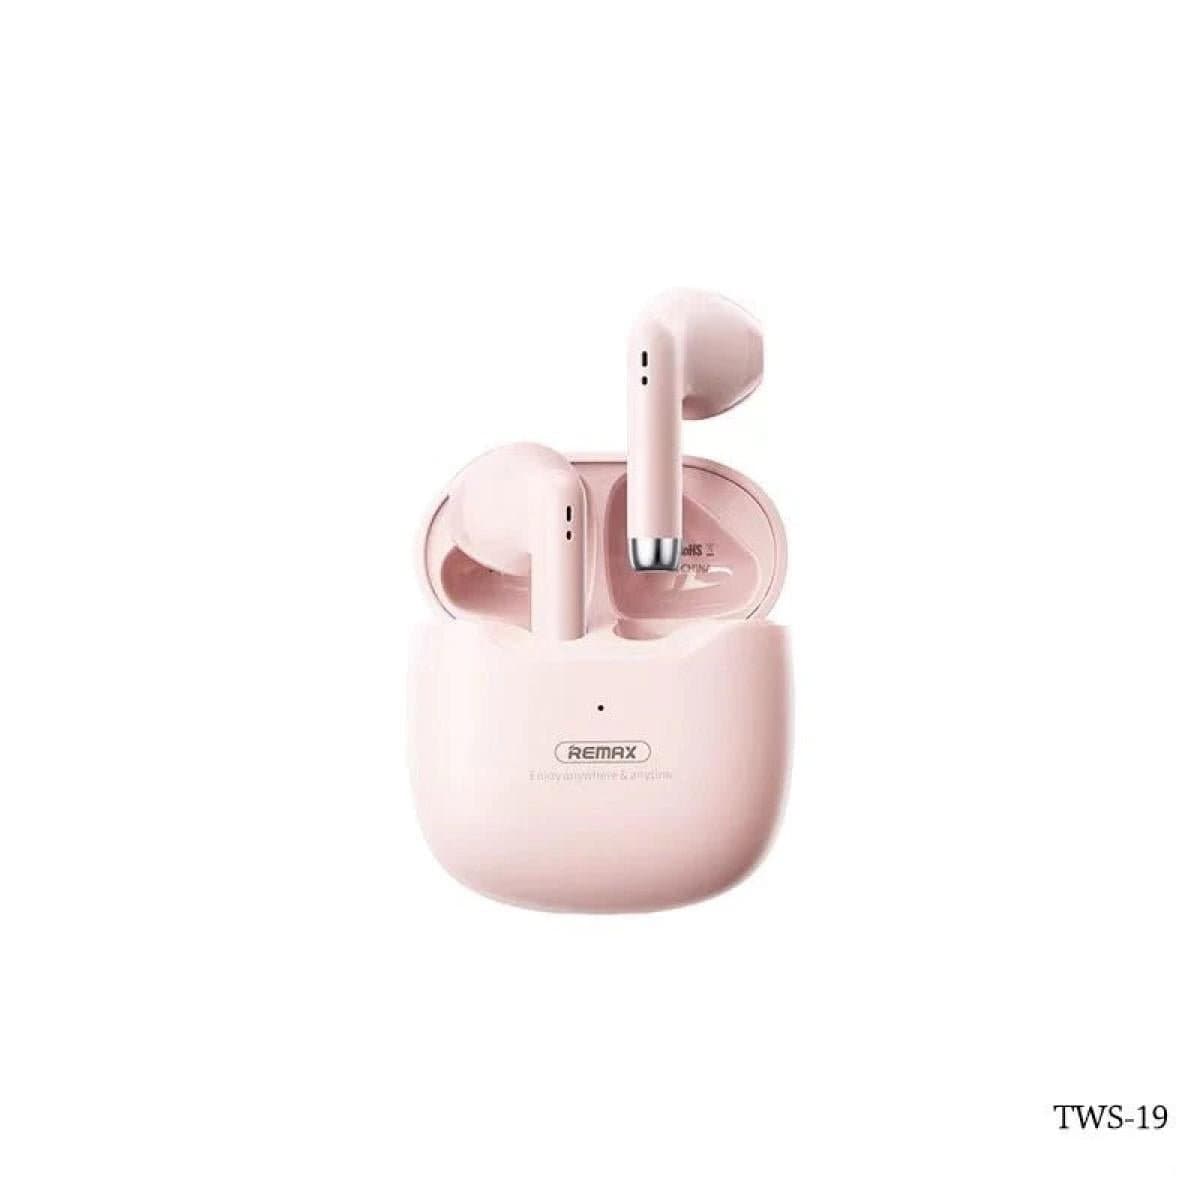 REMAX AirPods PINK Remax TWS-19 Marshmallow Series True Wireless Stereo Earbuds